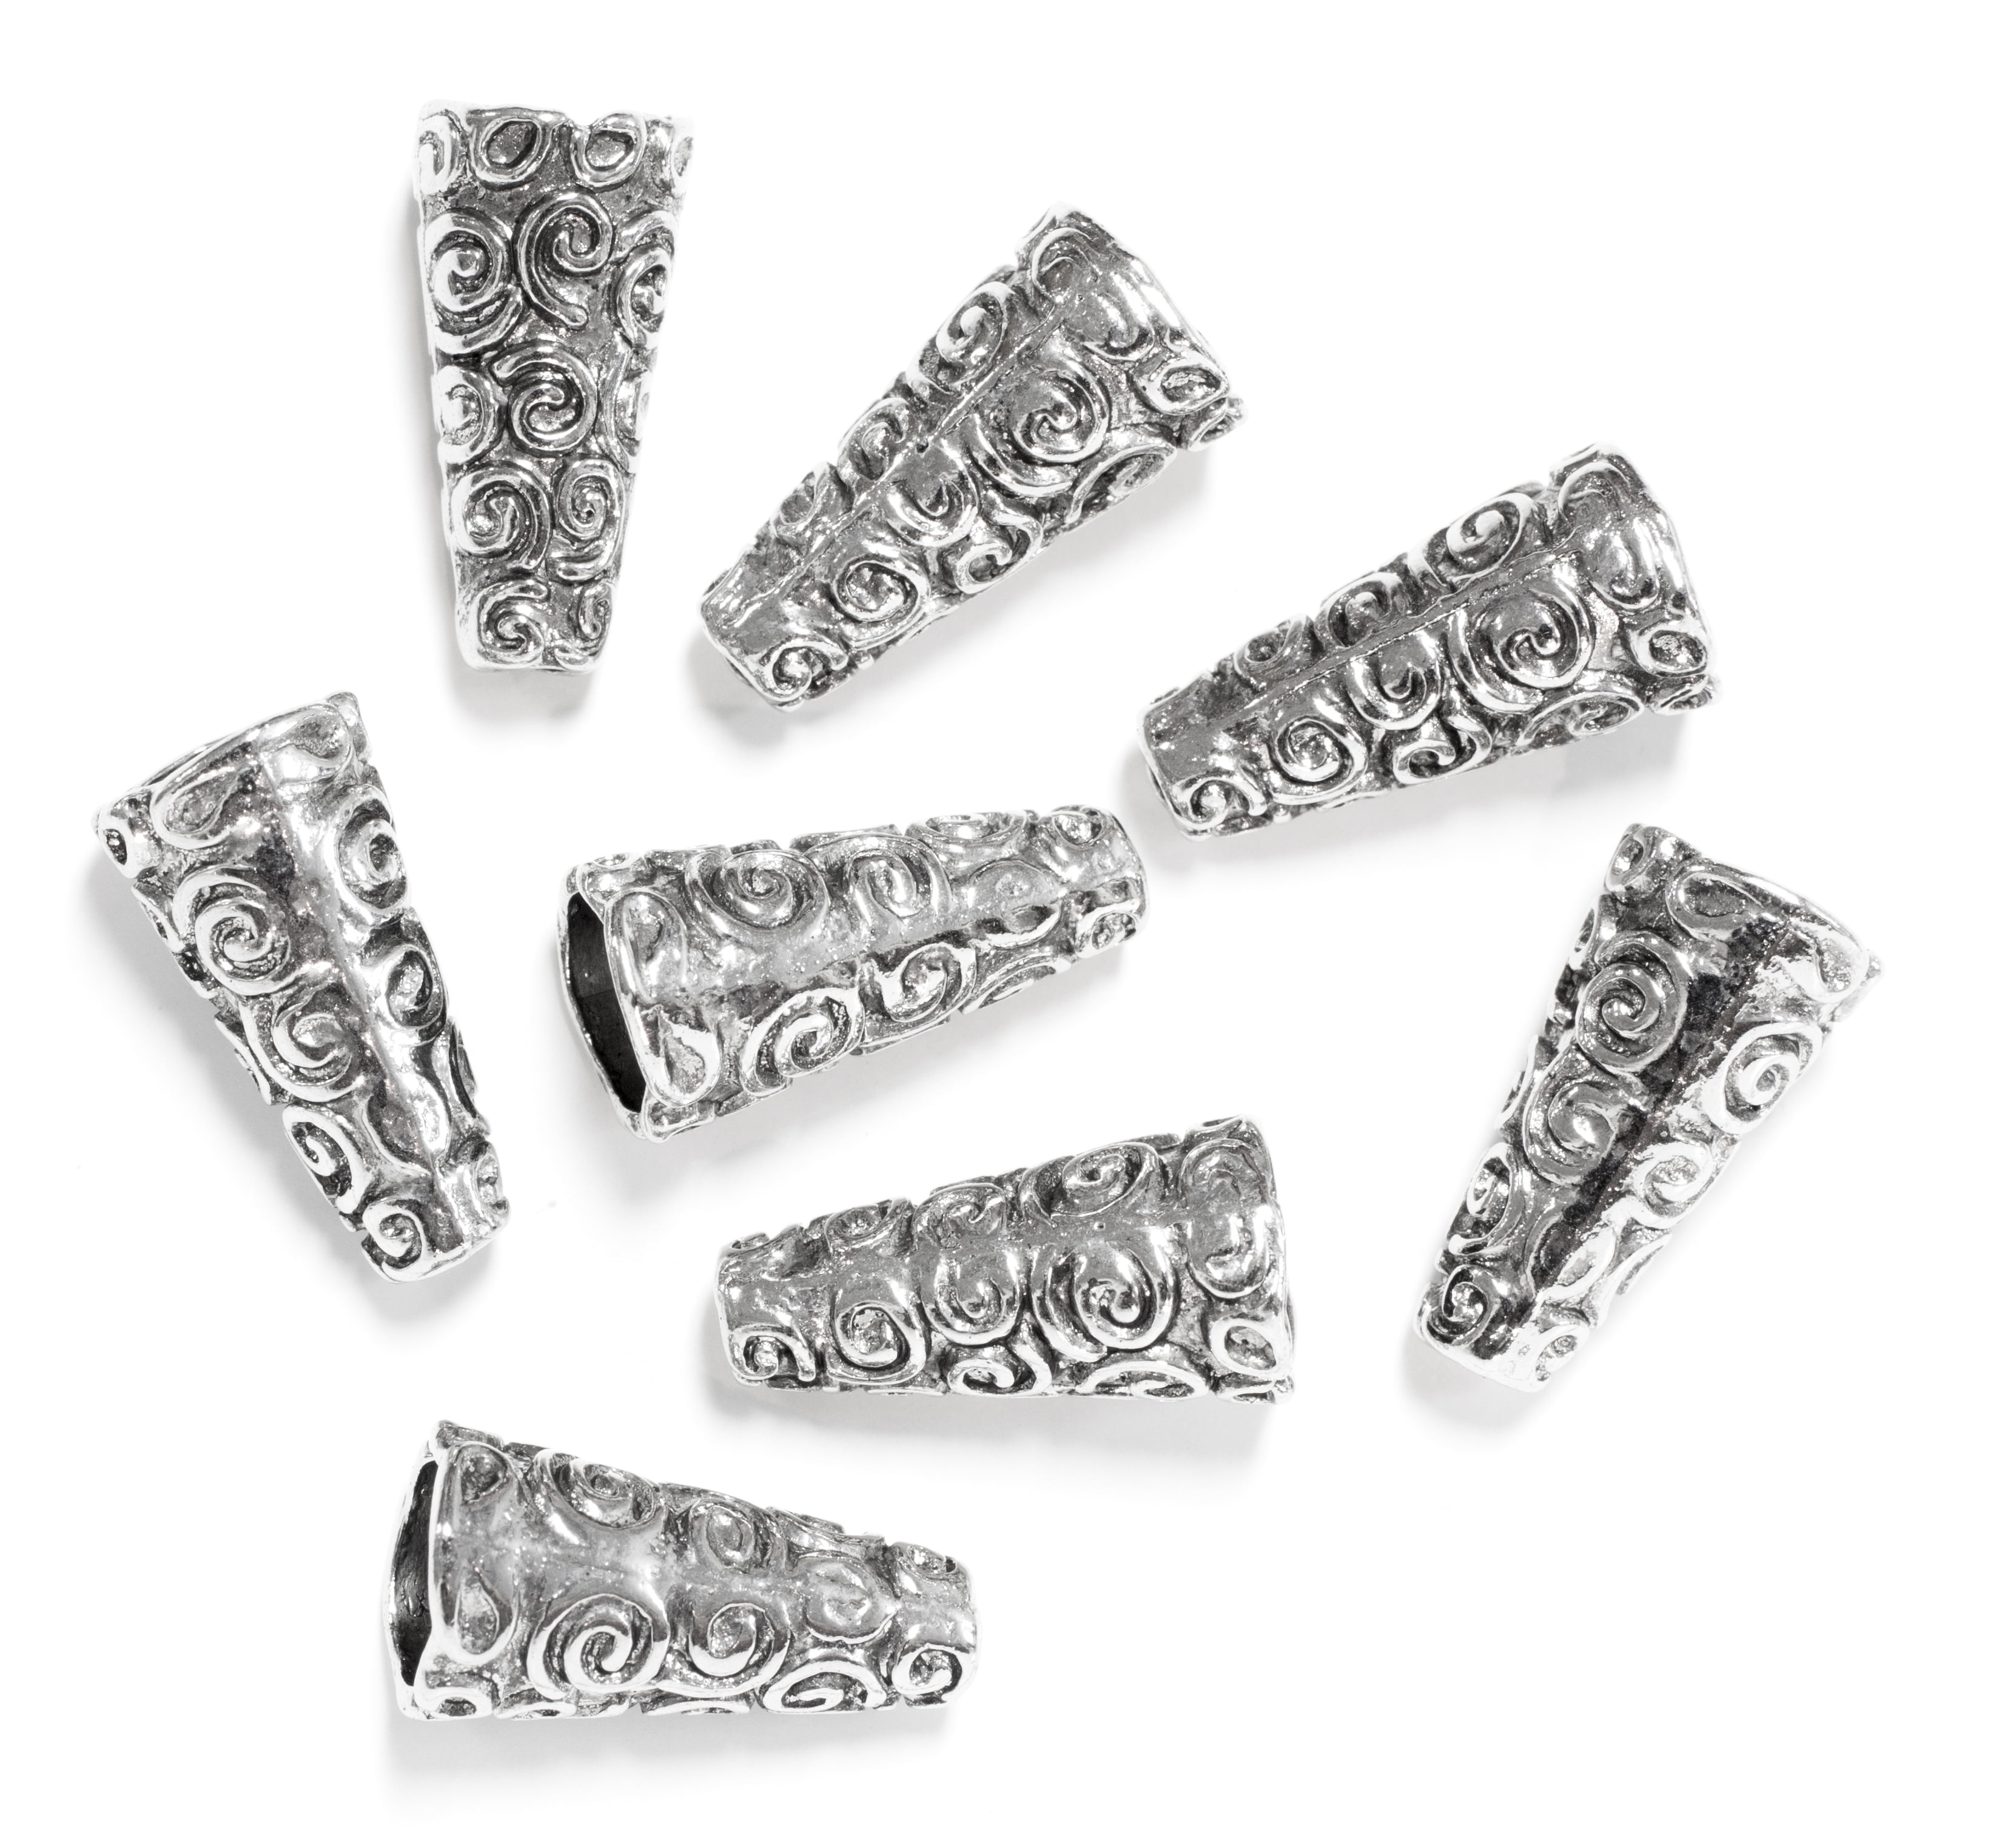 Pack of 20 Large Filigree Flat Bead Caps Antique Silver 